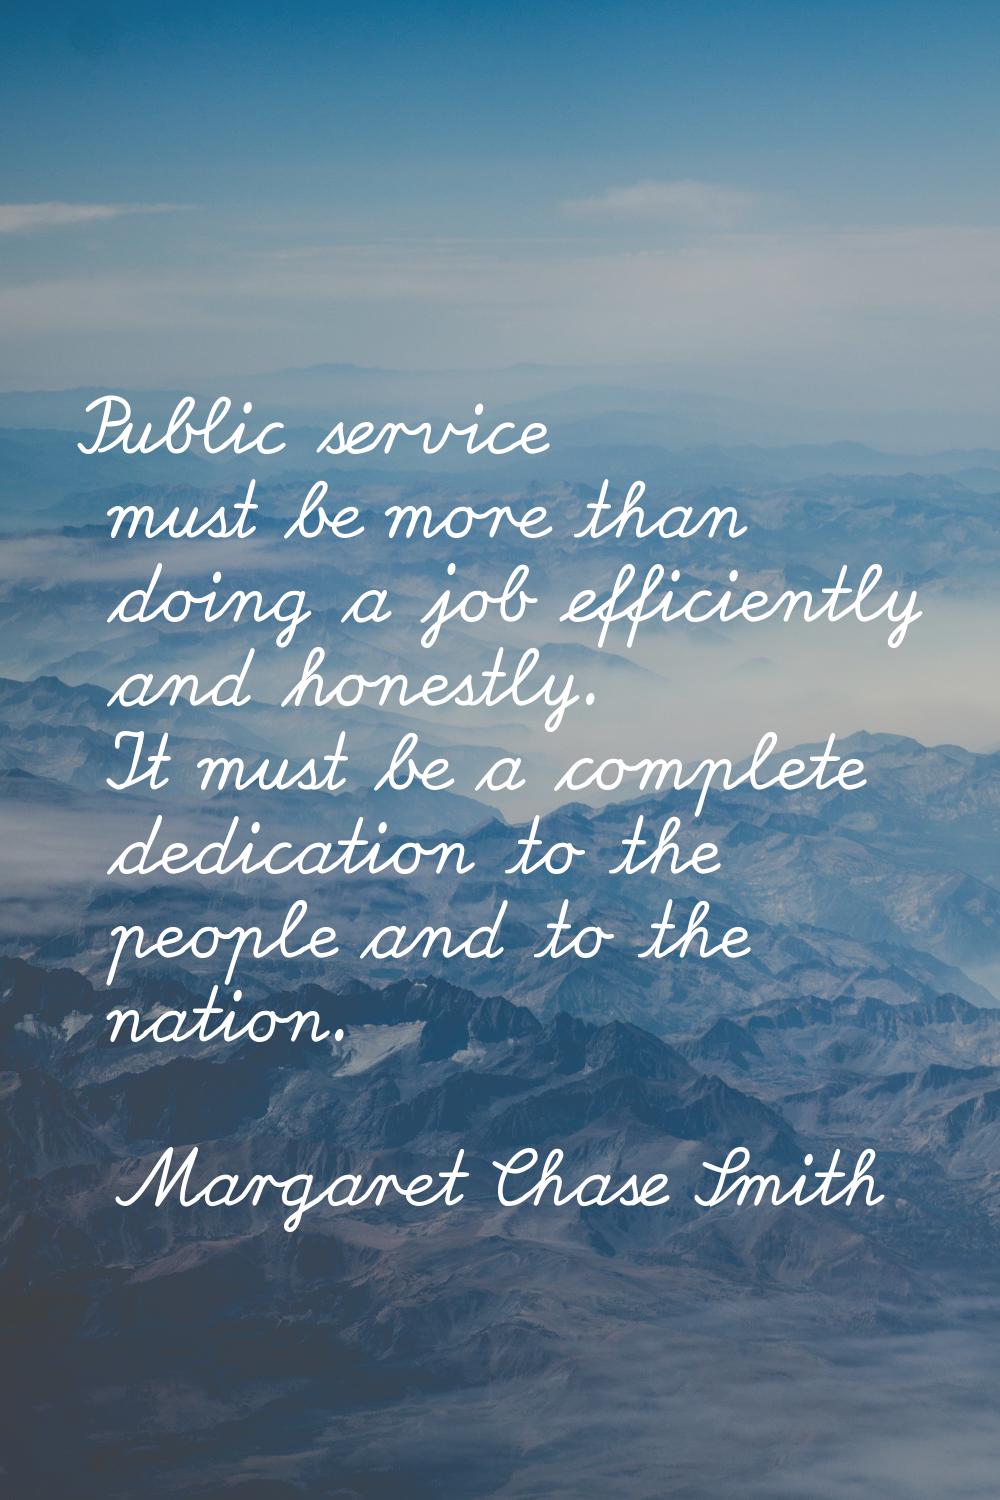 Public service must be more than doing a job efficiently and honestly. It must be a complete dedica